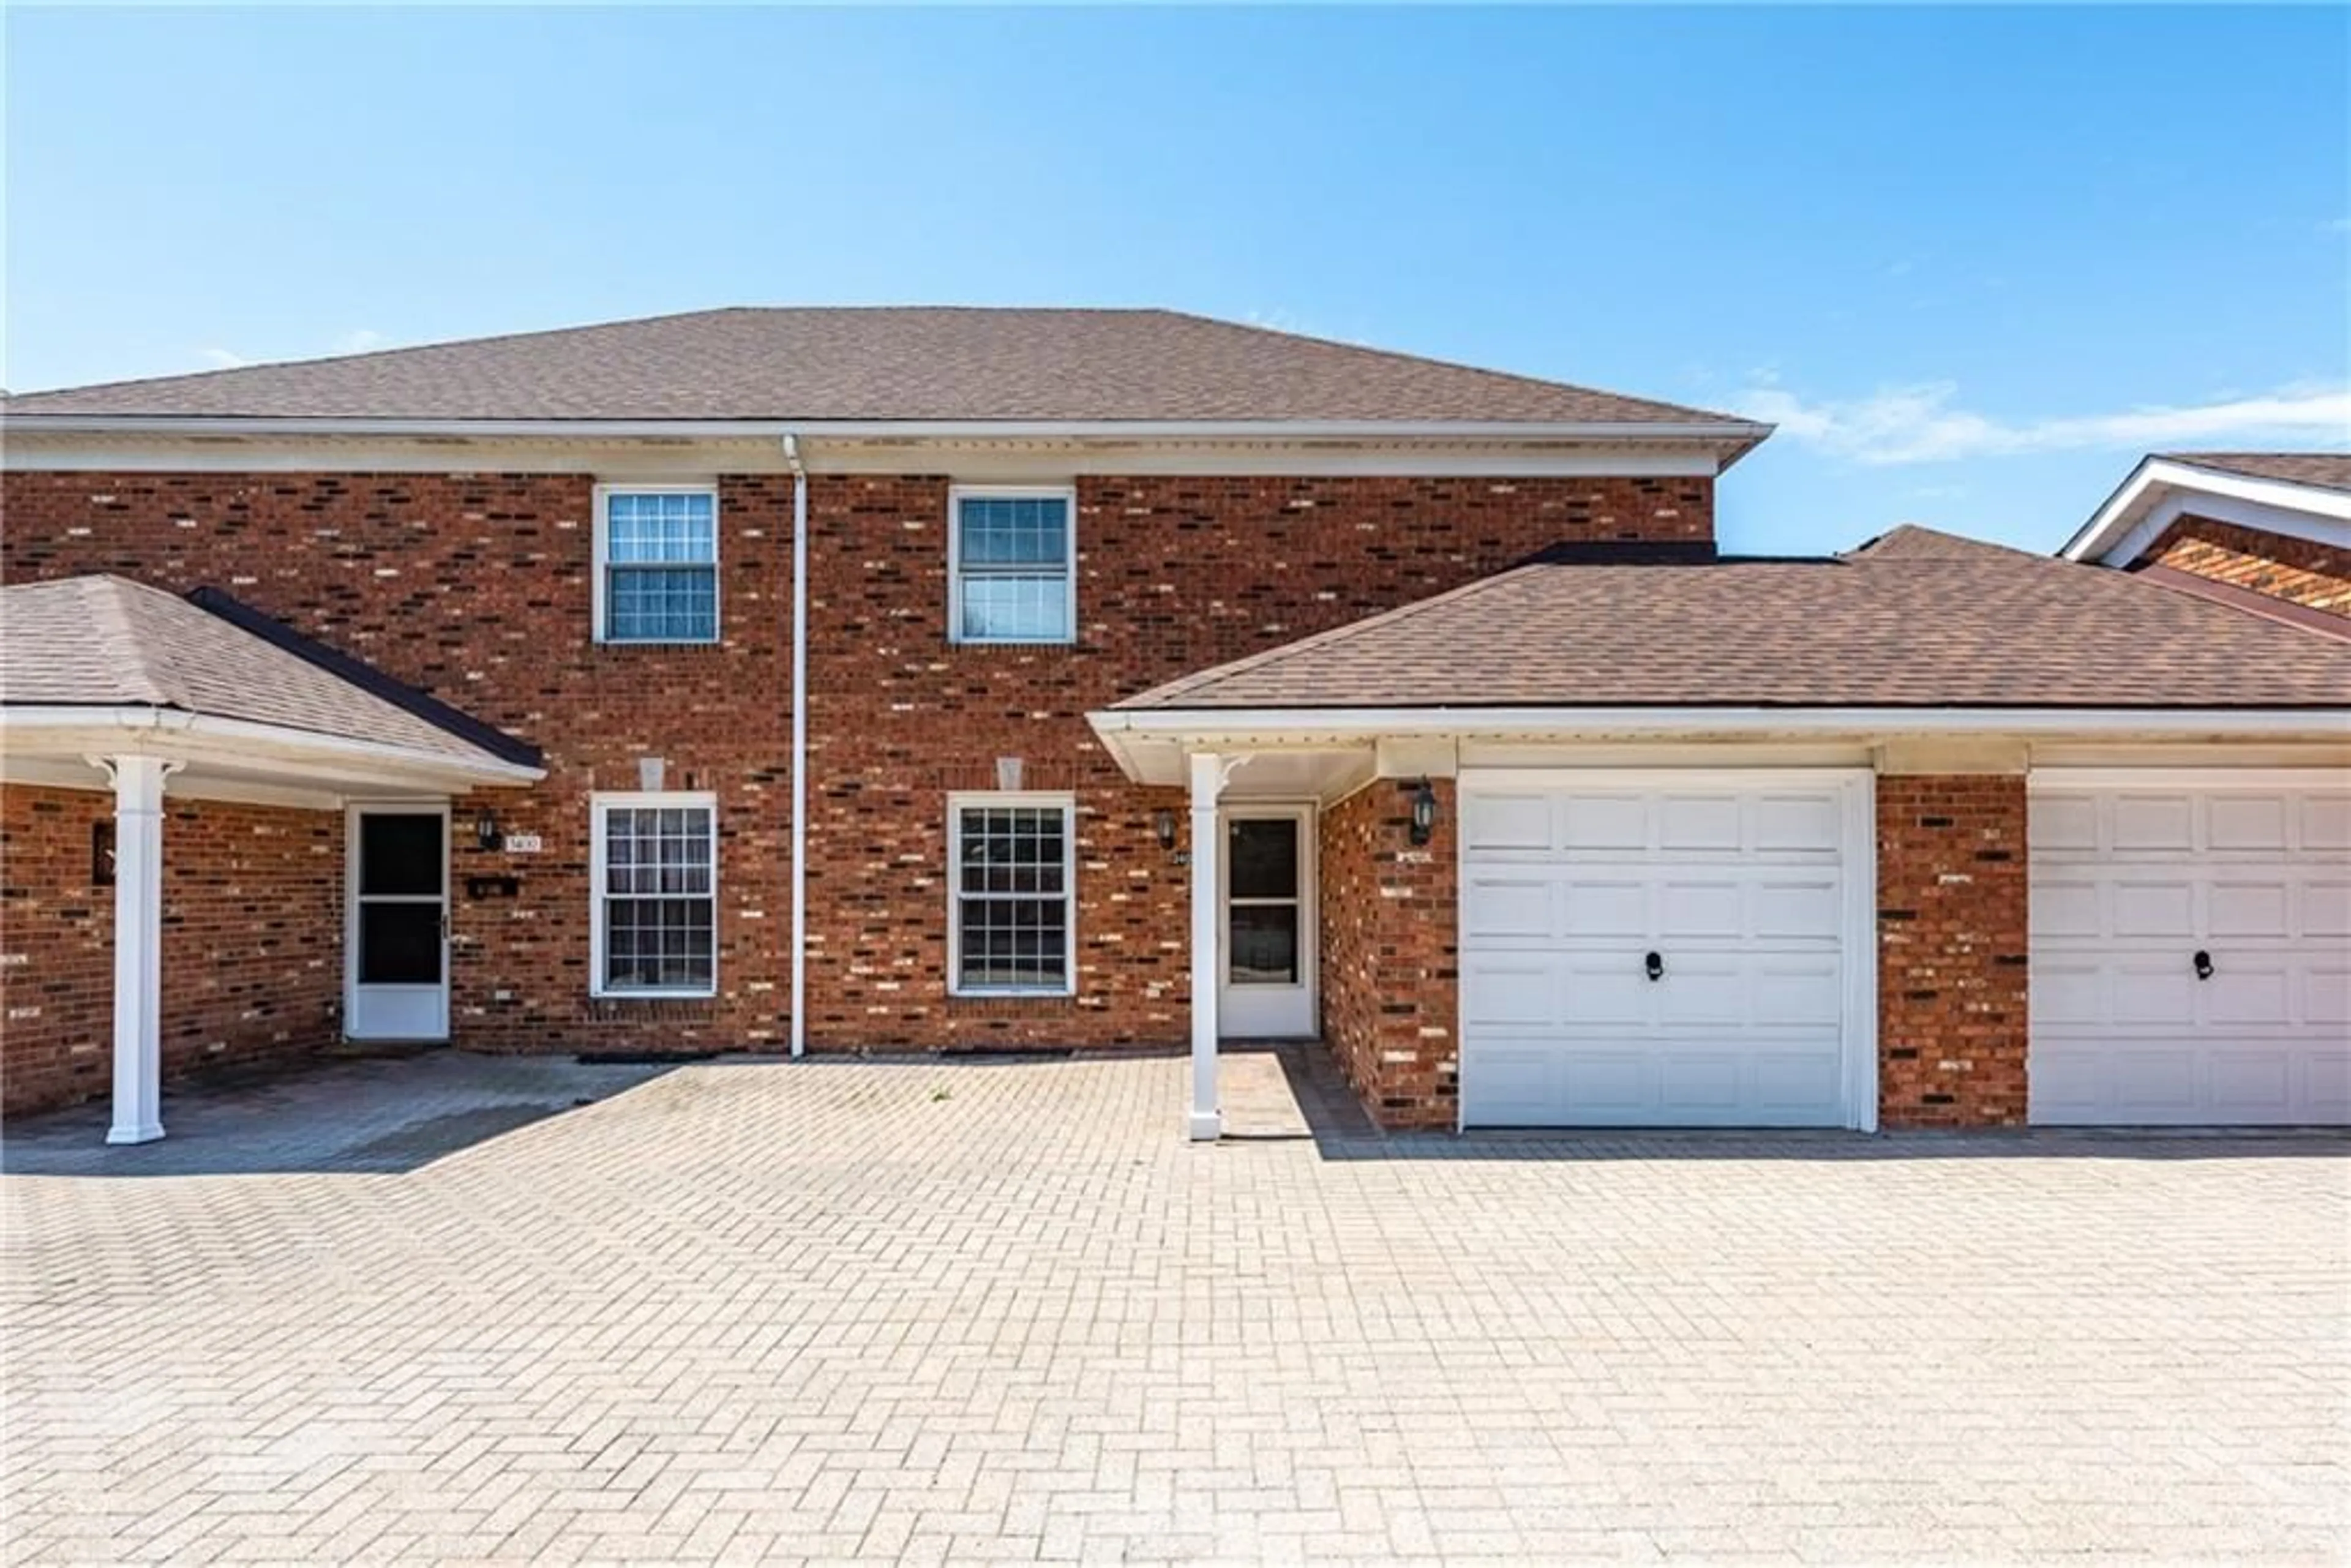 Home with brick exterior material for 3402 Frederick Ave #8, Vineland Ontario L0R 2C0